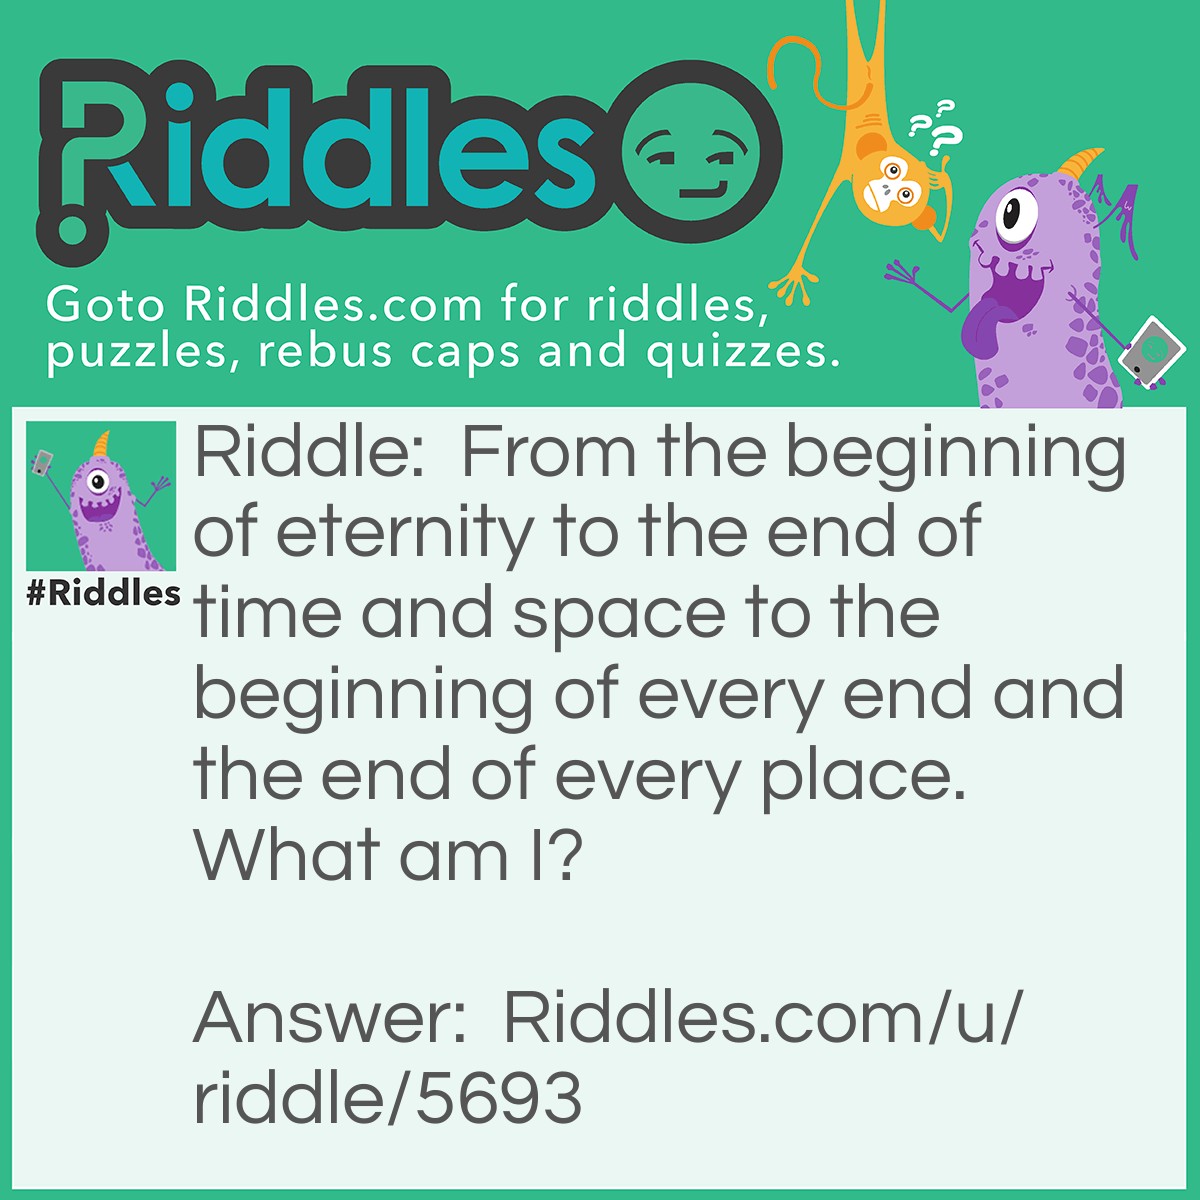 Riddle: From the beginning of eternity to the end of time and space to the beginning of every end and the end of every place. What am I? Answer: The letter E.